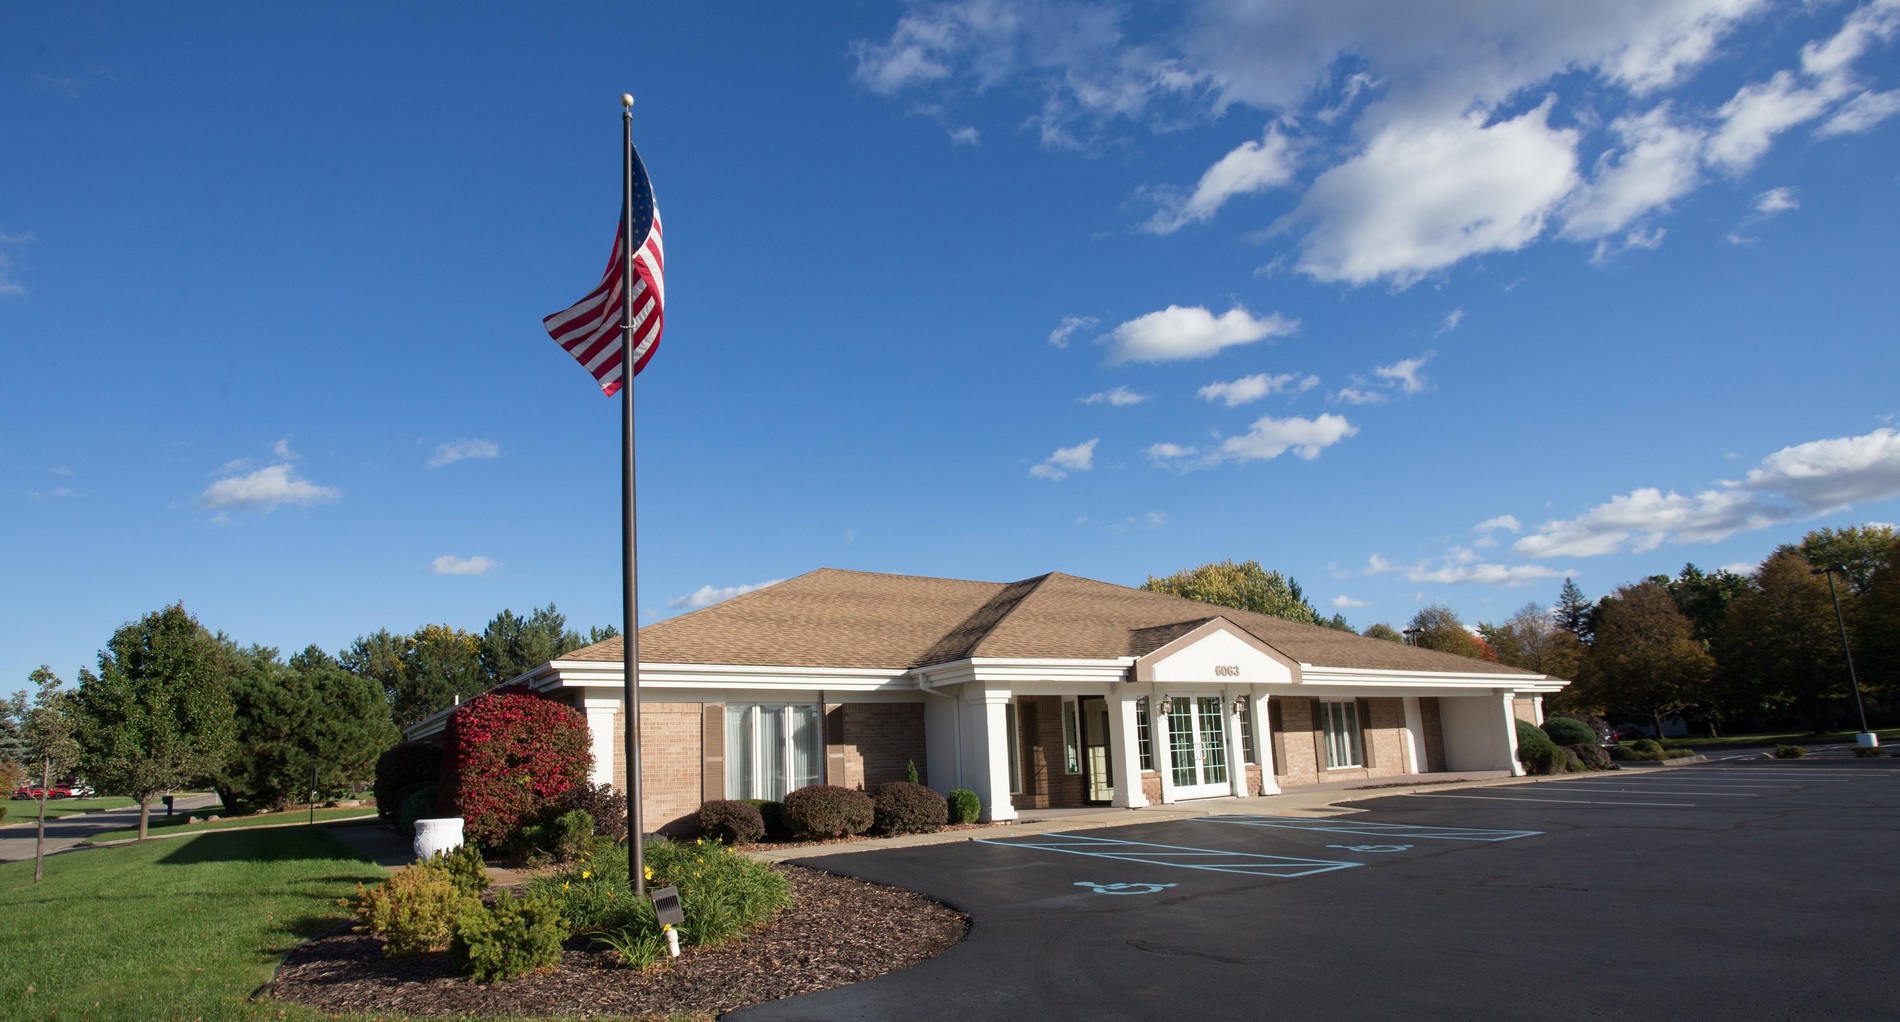 Images Sharp Funeral Home & Cremation Center